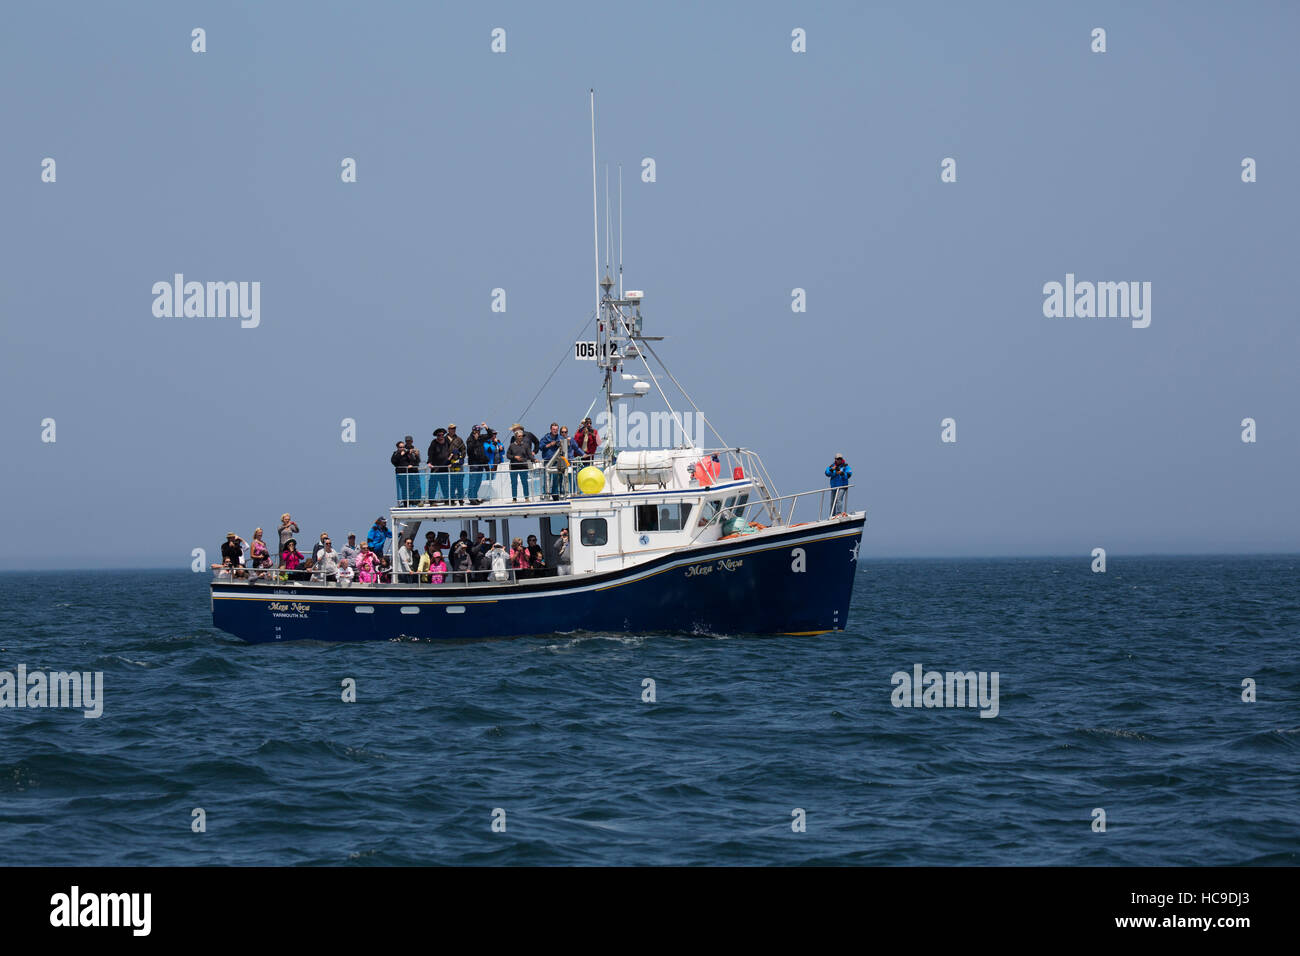 A whale watching cruise off Nova Scotia, Canada. The area is known for whale watching tours. Stock Photo